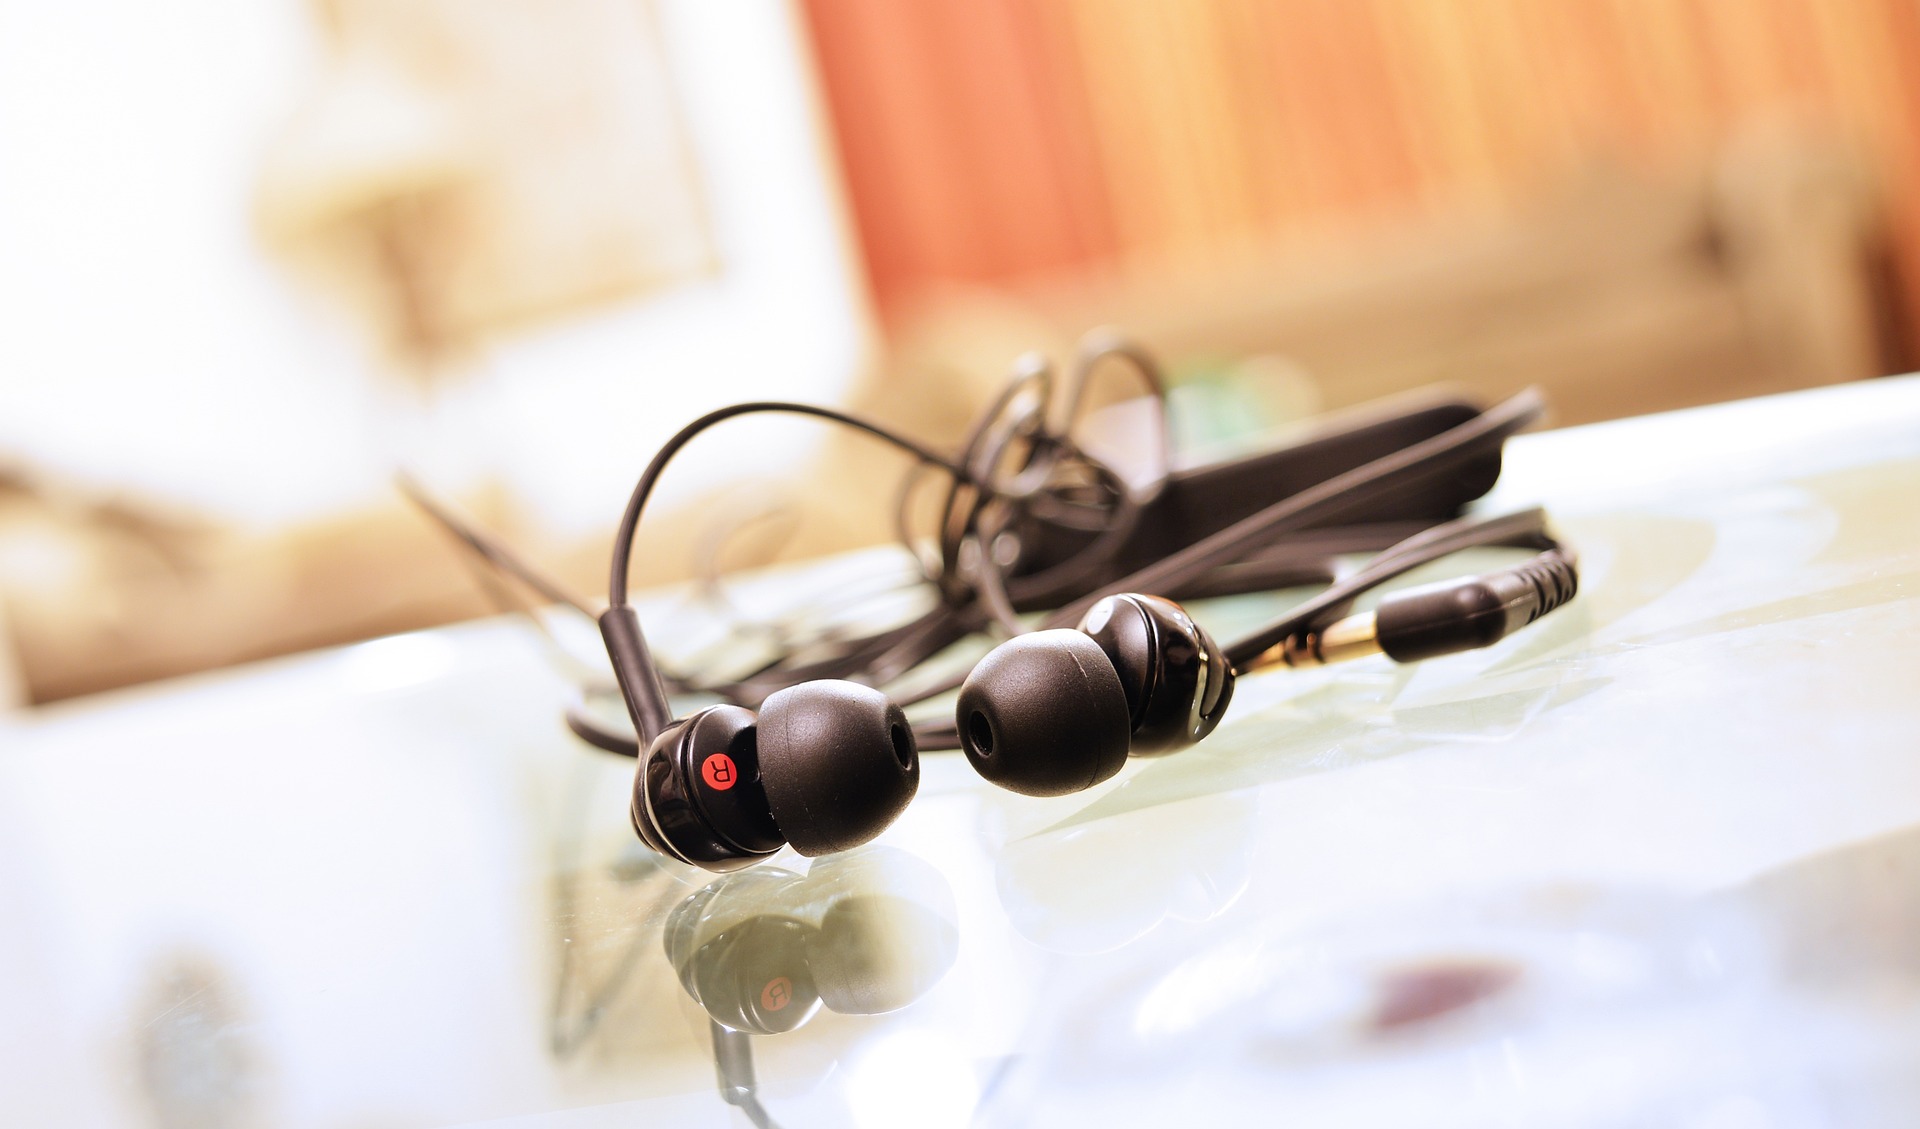 The Best Personal Audio Devices Of 2023 - Enhancing Your Listening Experience